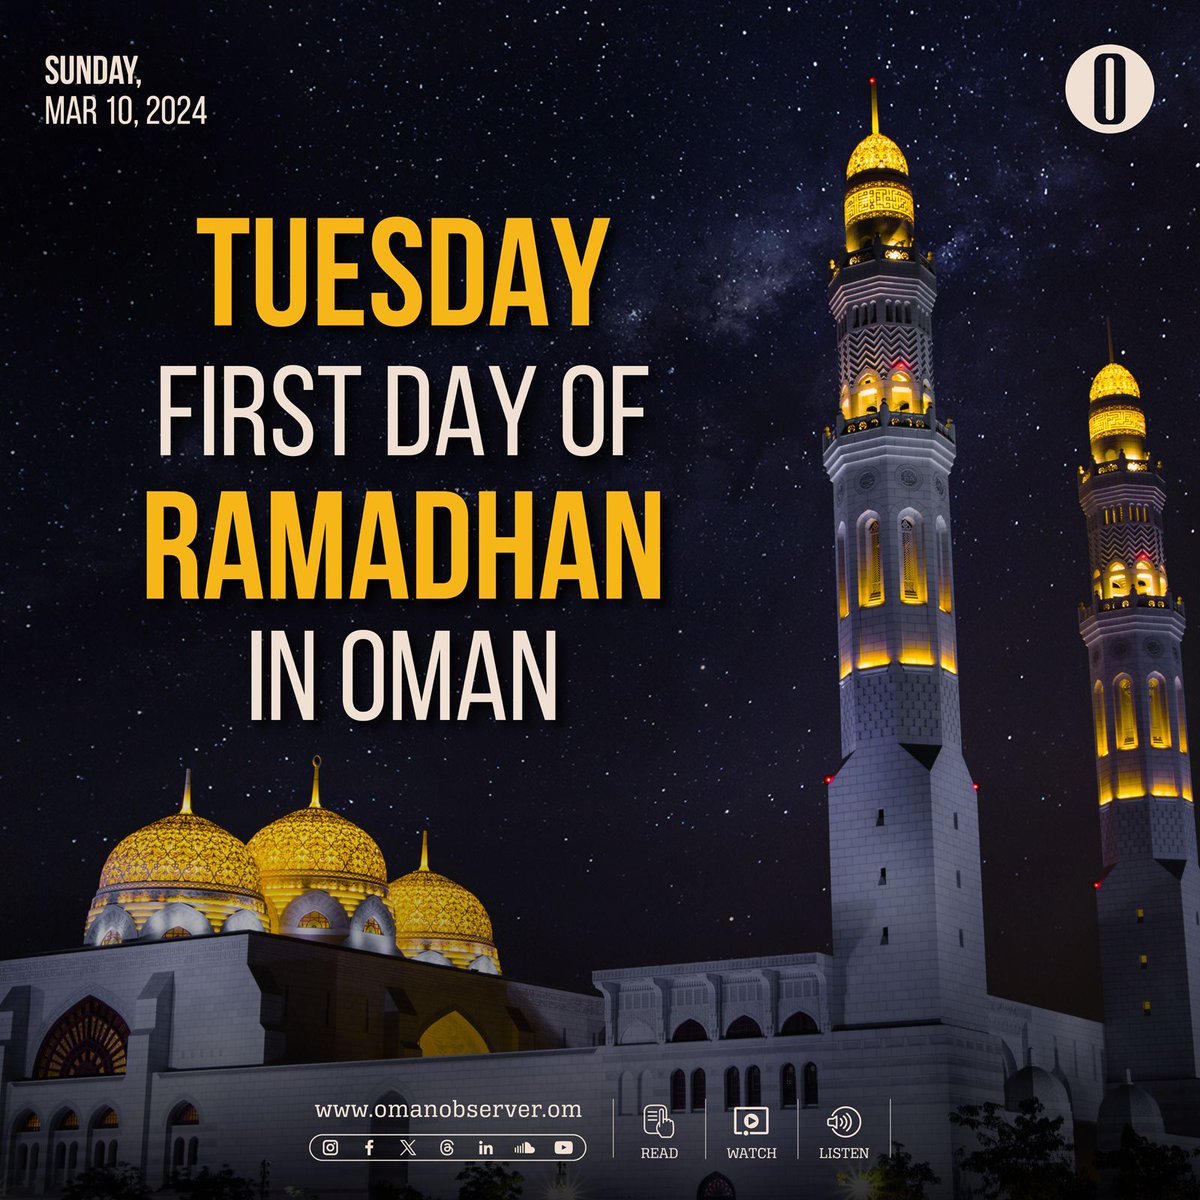 First day of Ramadhan in Oman on Tuesday